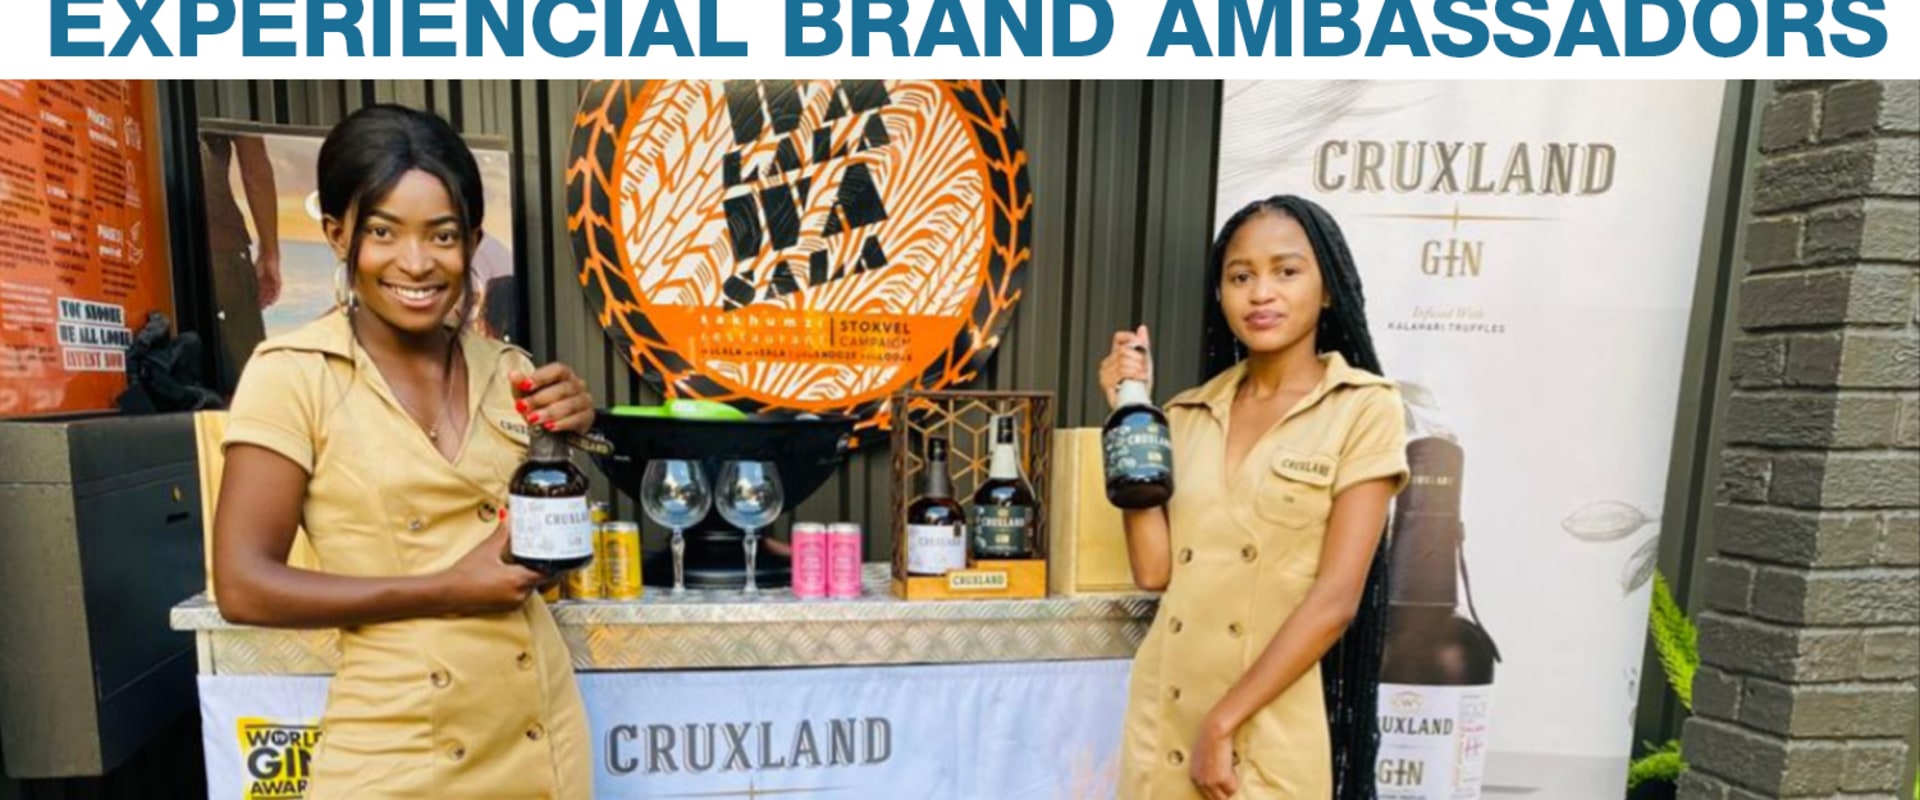 How to Become a Brand Ambassador for Clothes in South Africa